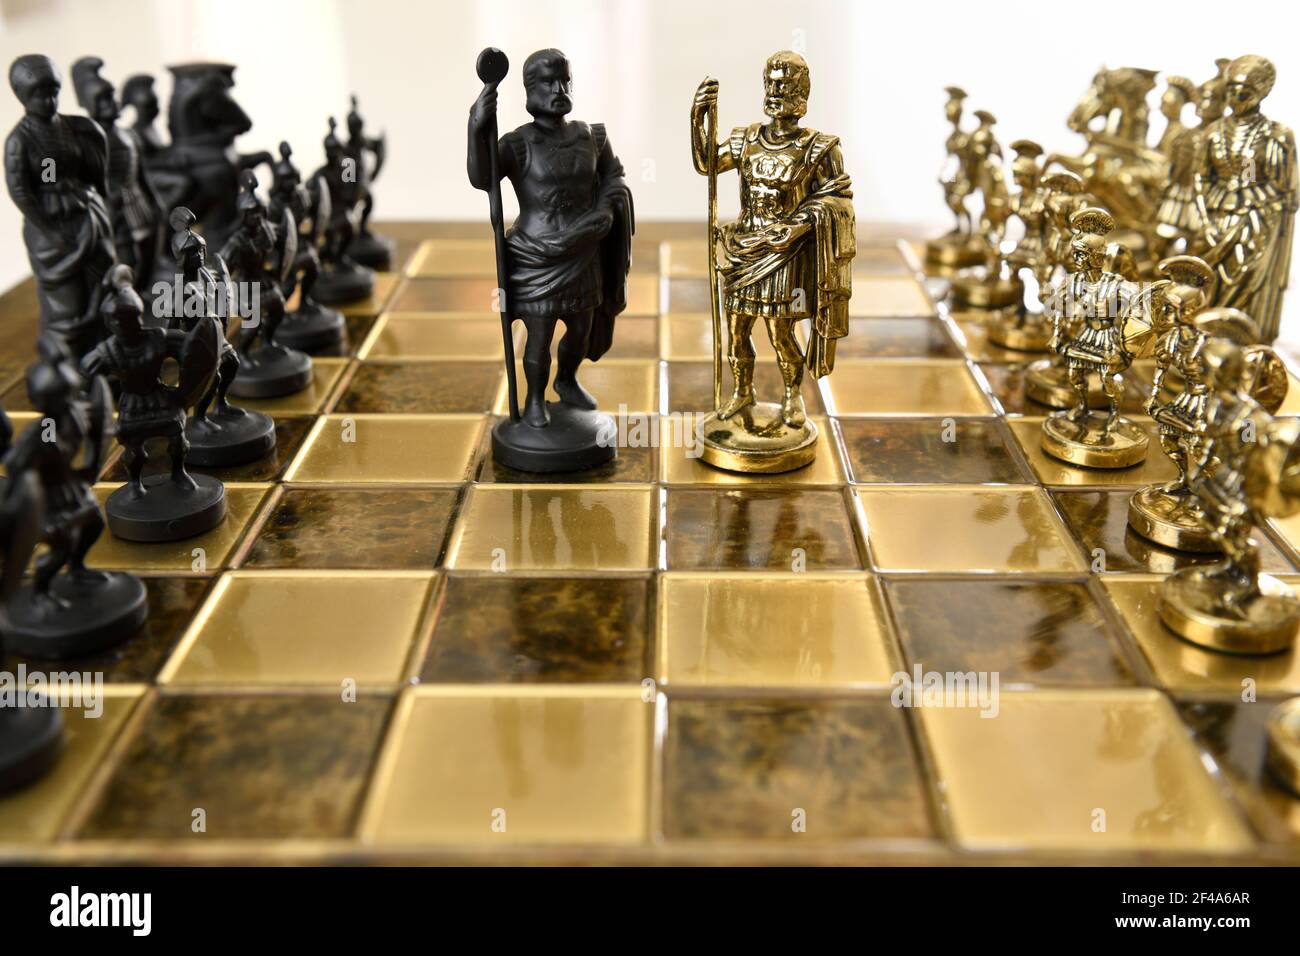 Black and gold metal Roman emperor King chess figurines from opposing armies on chessboard ready for battle Stock Photo